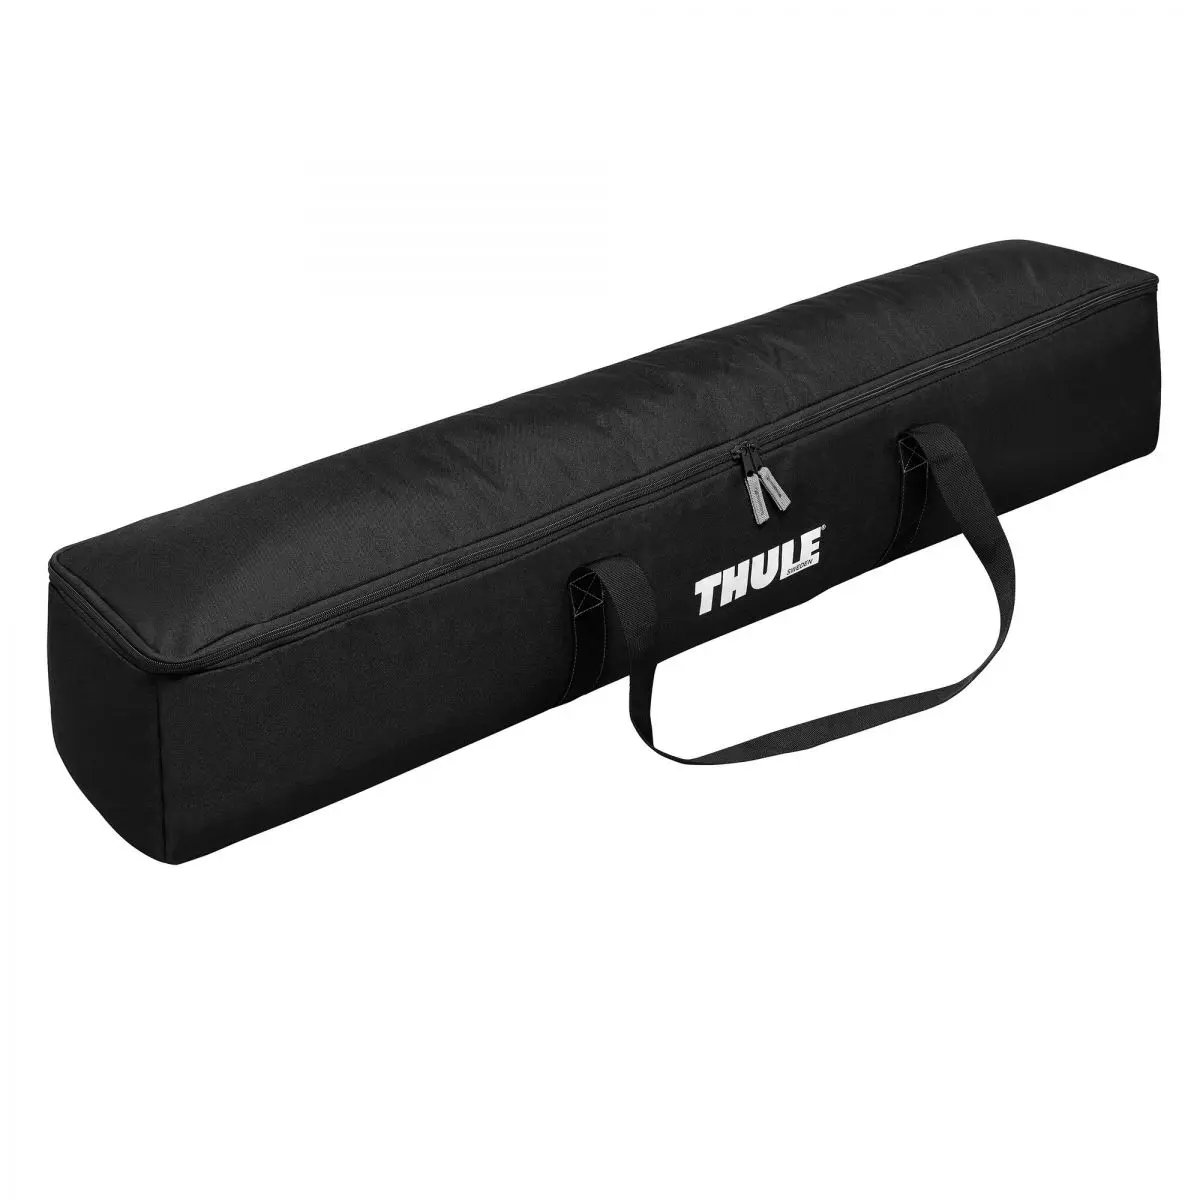 Thule Panorama pentru TO 8000, lungime 4,5 m, inaltime L